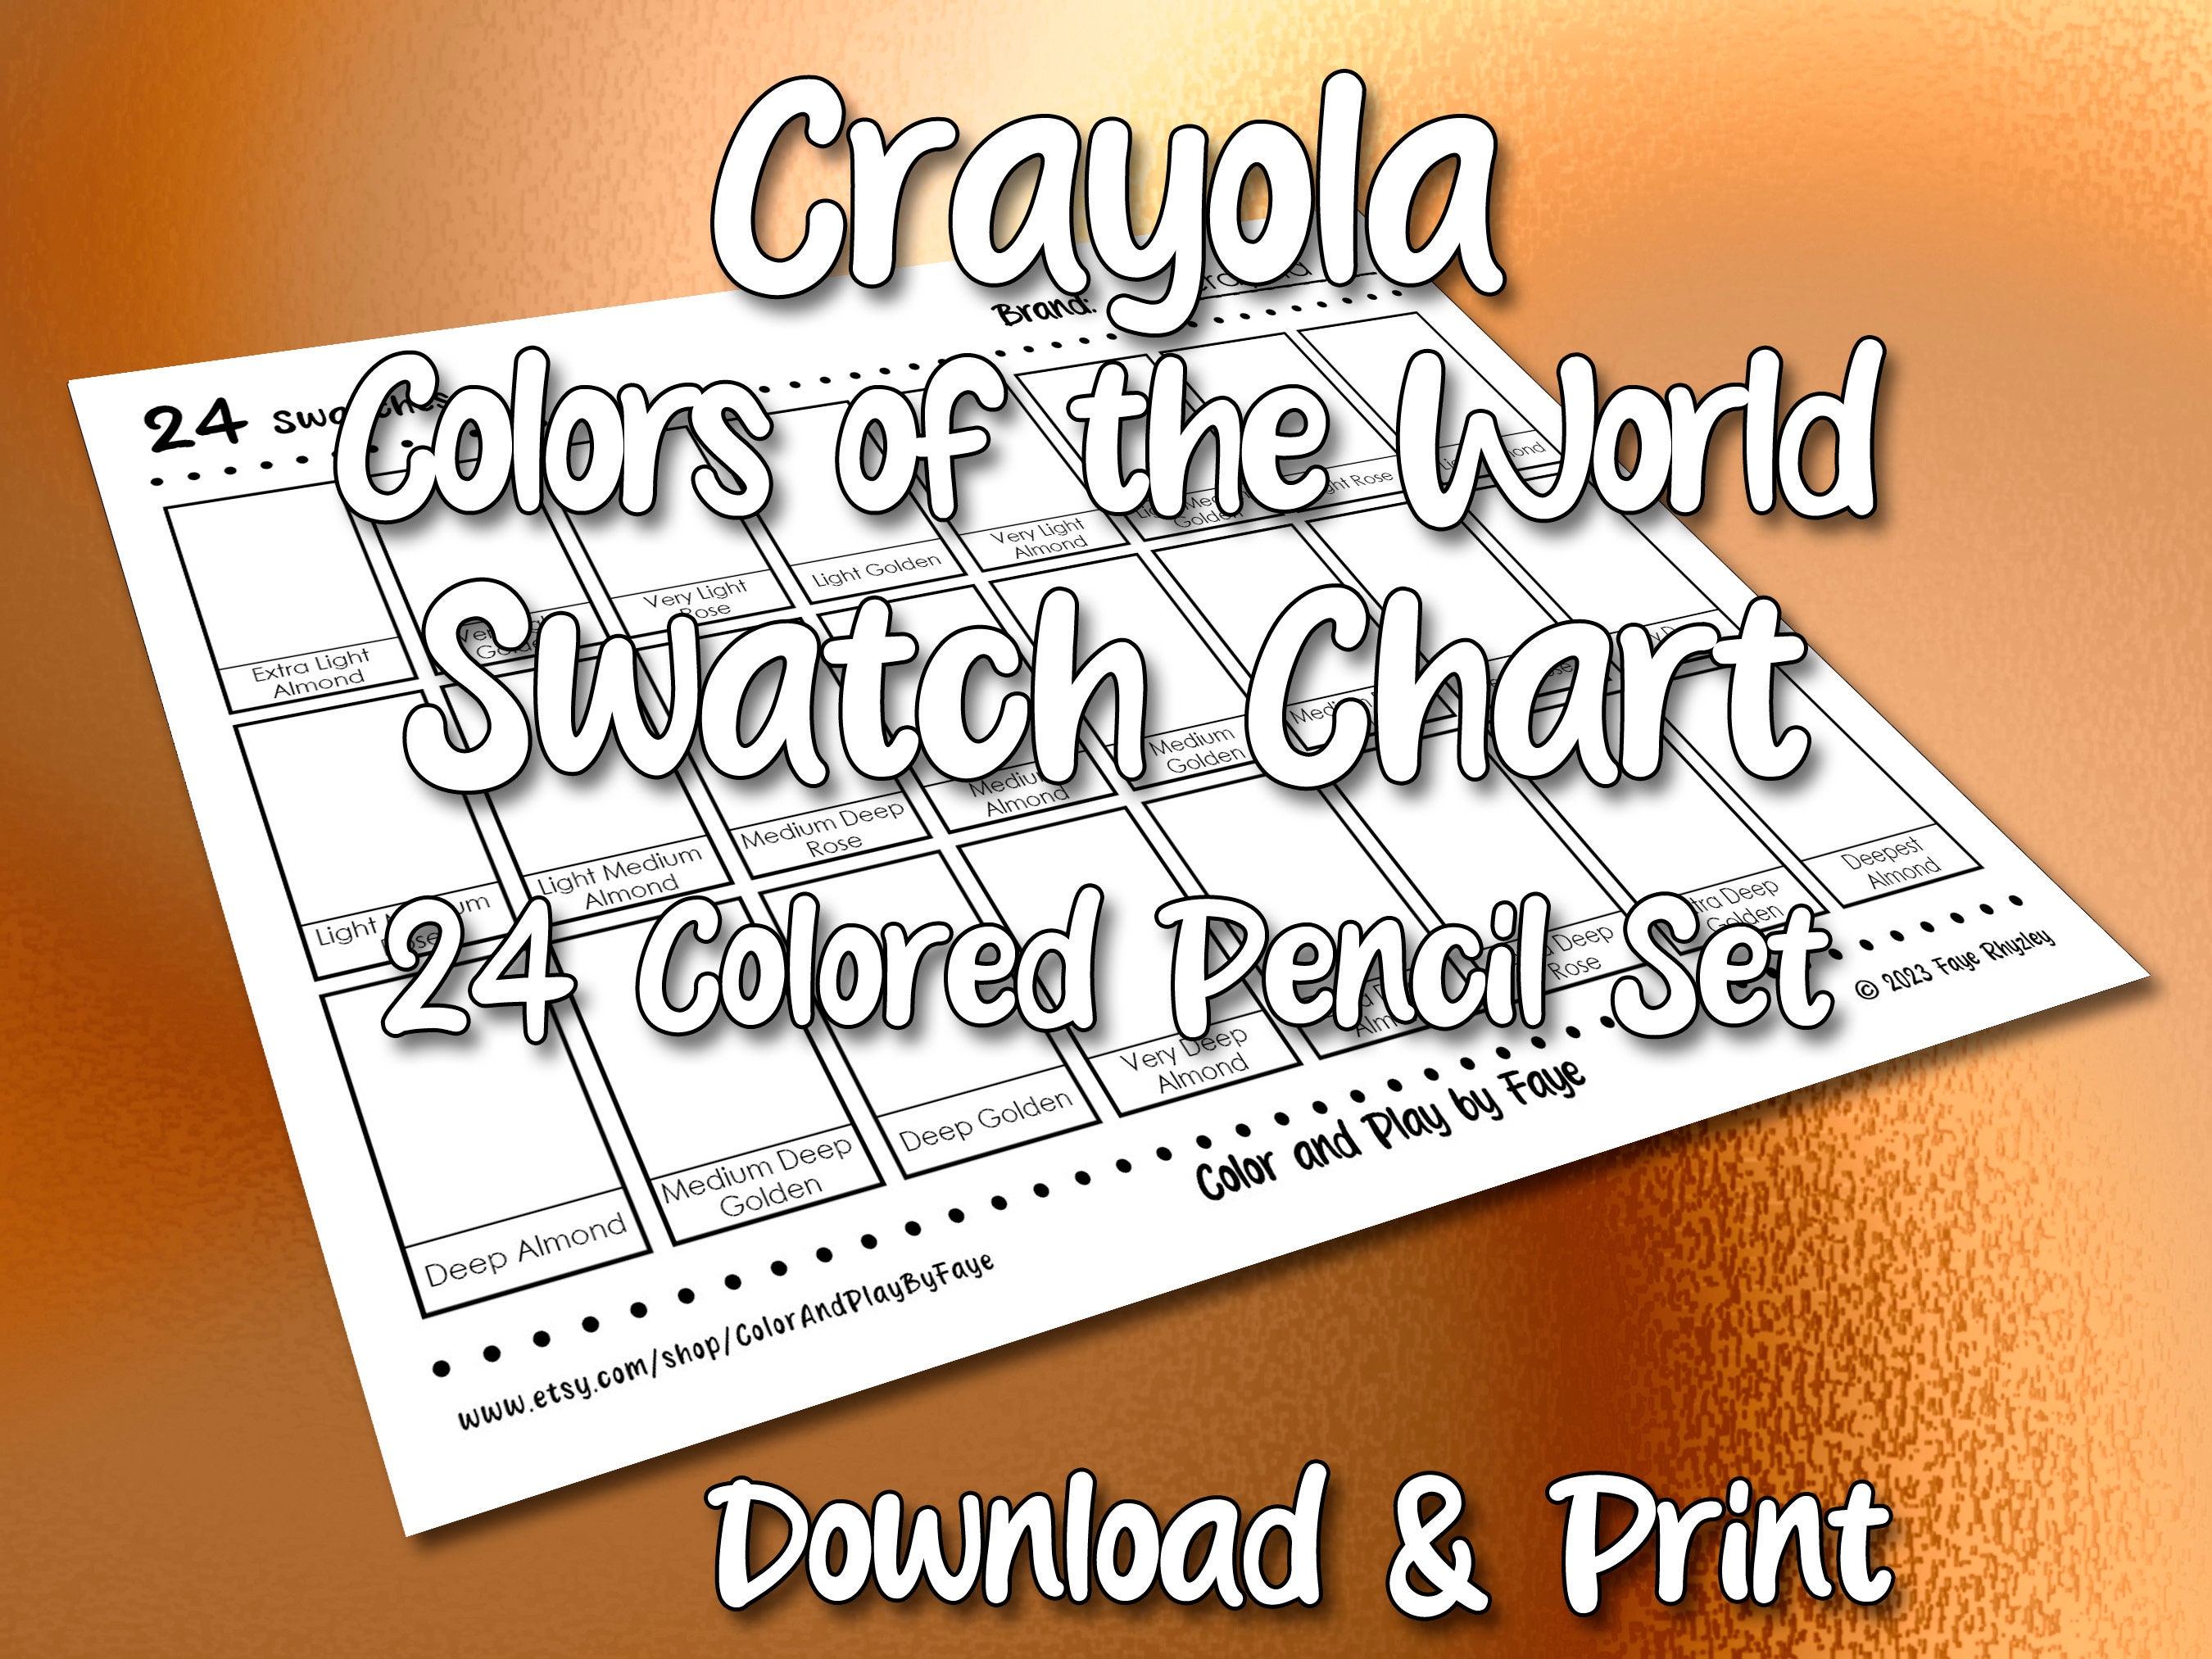 Swatch Form: Crayola Colored Pencils With Colors of the World